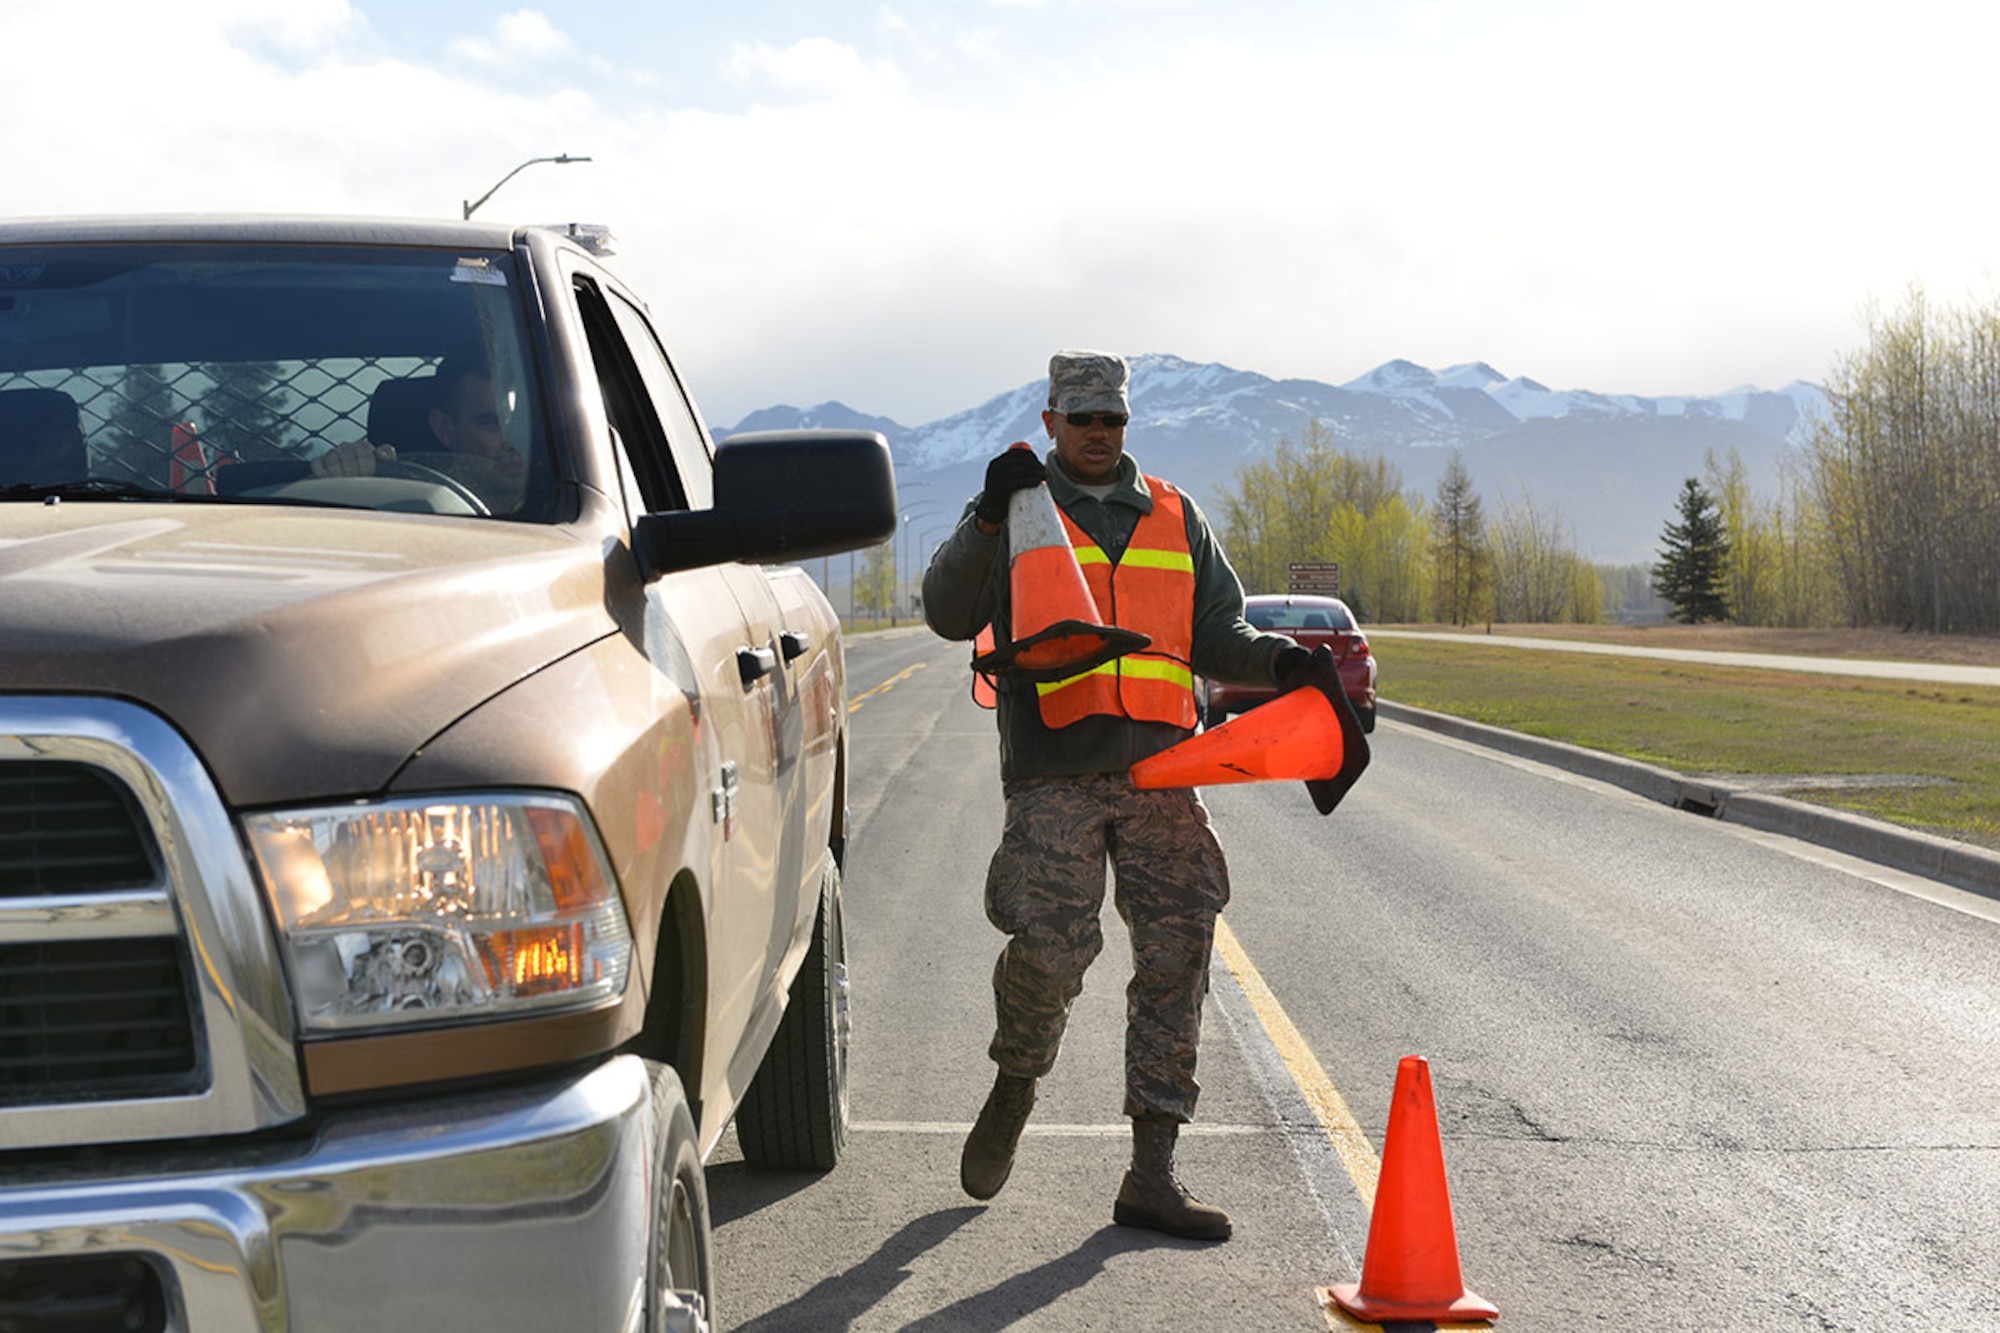 Airman 1st Class Nicholas McGee, a 773rd Civil Engineering Squadron structural apprentice augmenting the paint shop walks behind a striping truck, placing cones to show motorists where paint is wet. When driving near or by a paint team, motorists should exercise caution so as to not damage their vehicles or place the Airmen at risk. (U.S. Air Force photo by Airman 1st Class Kyle Johnson)